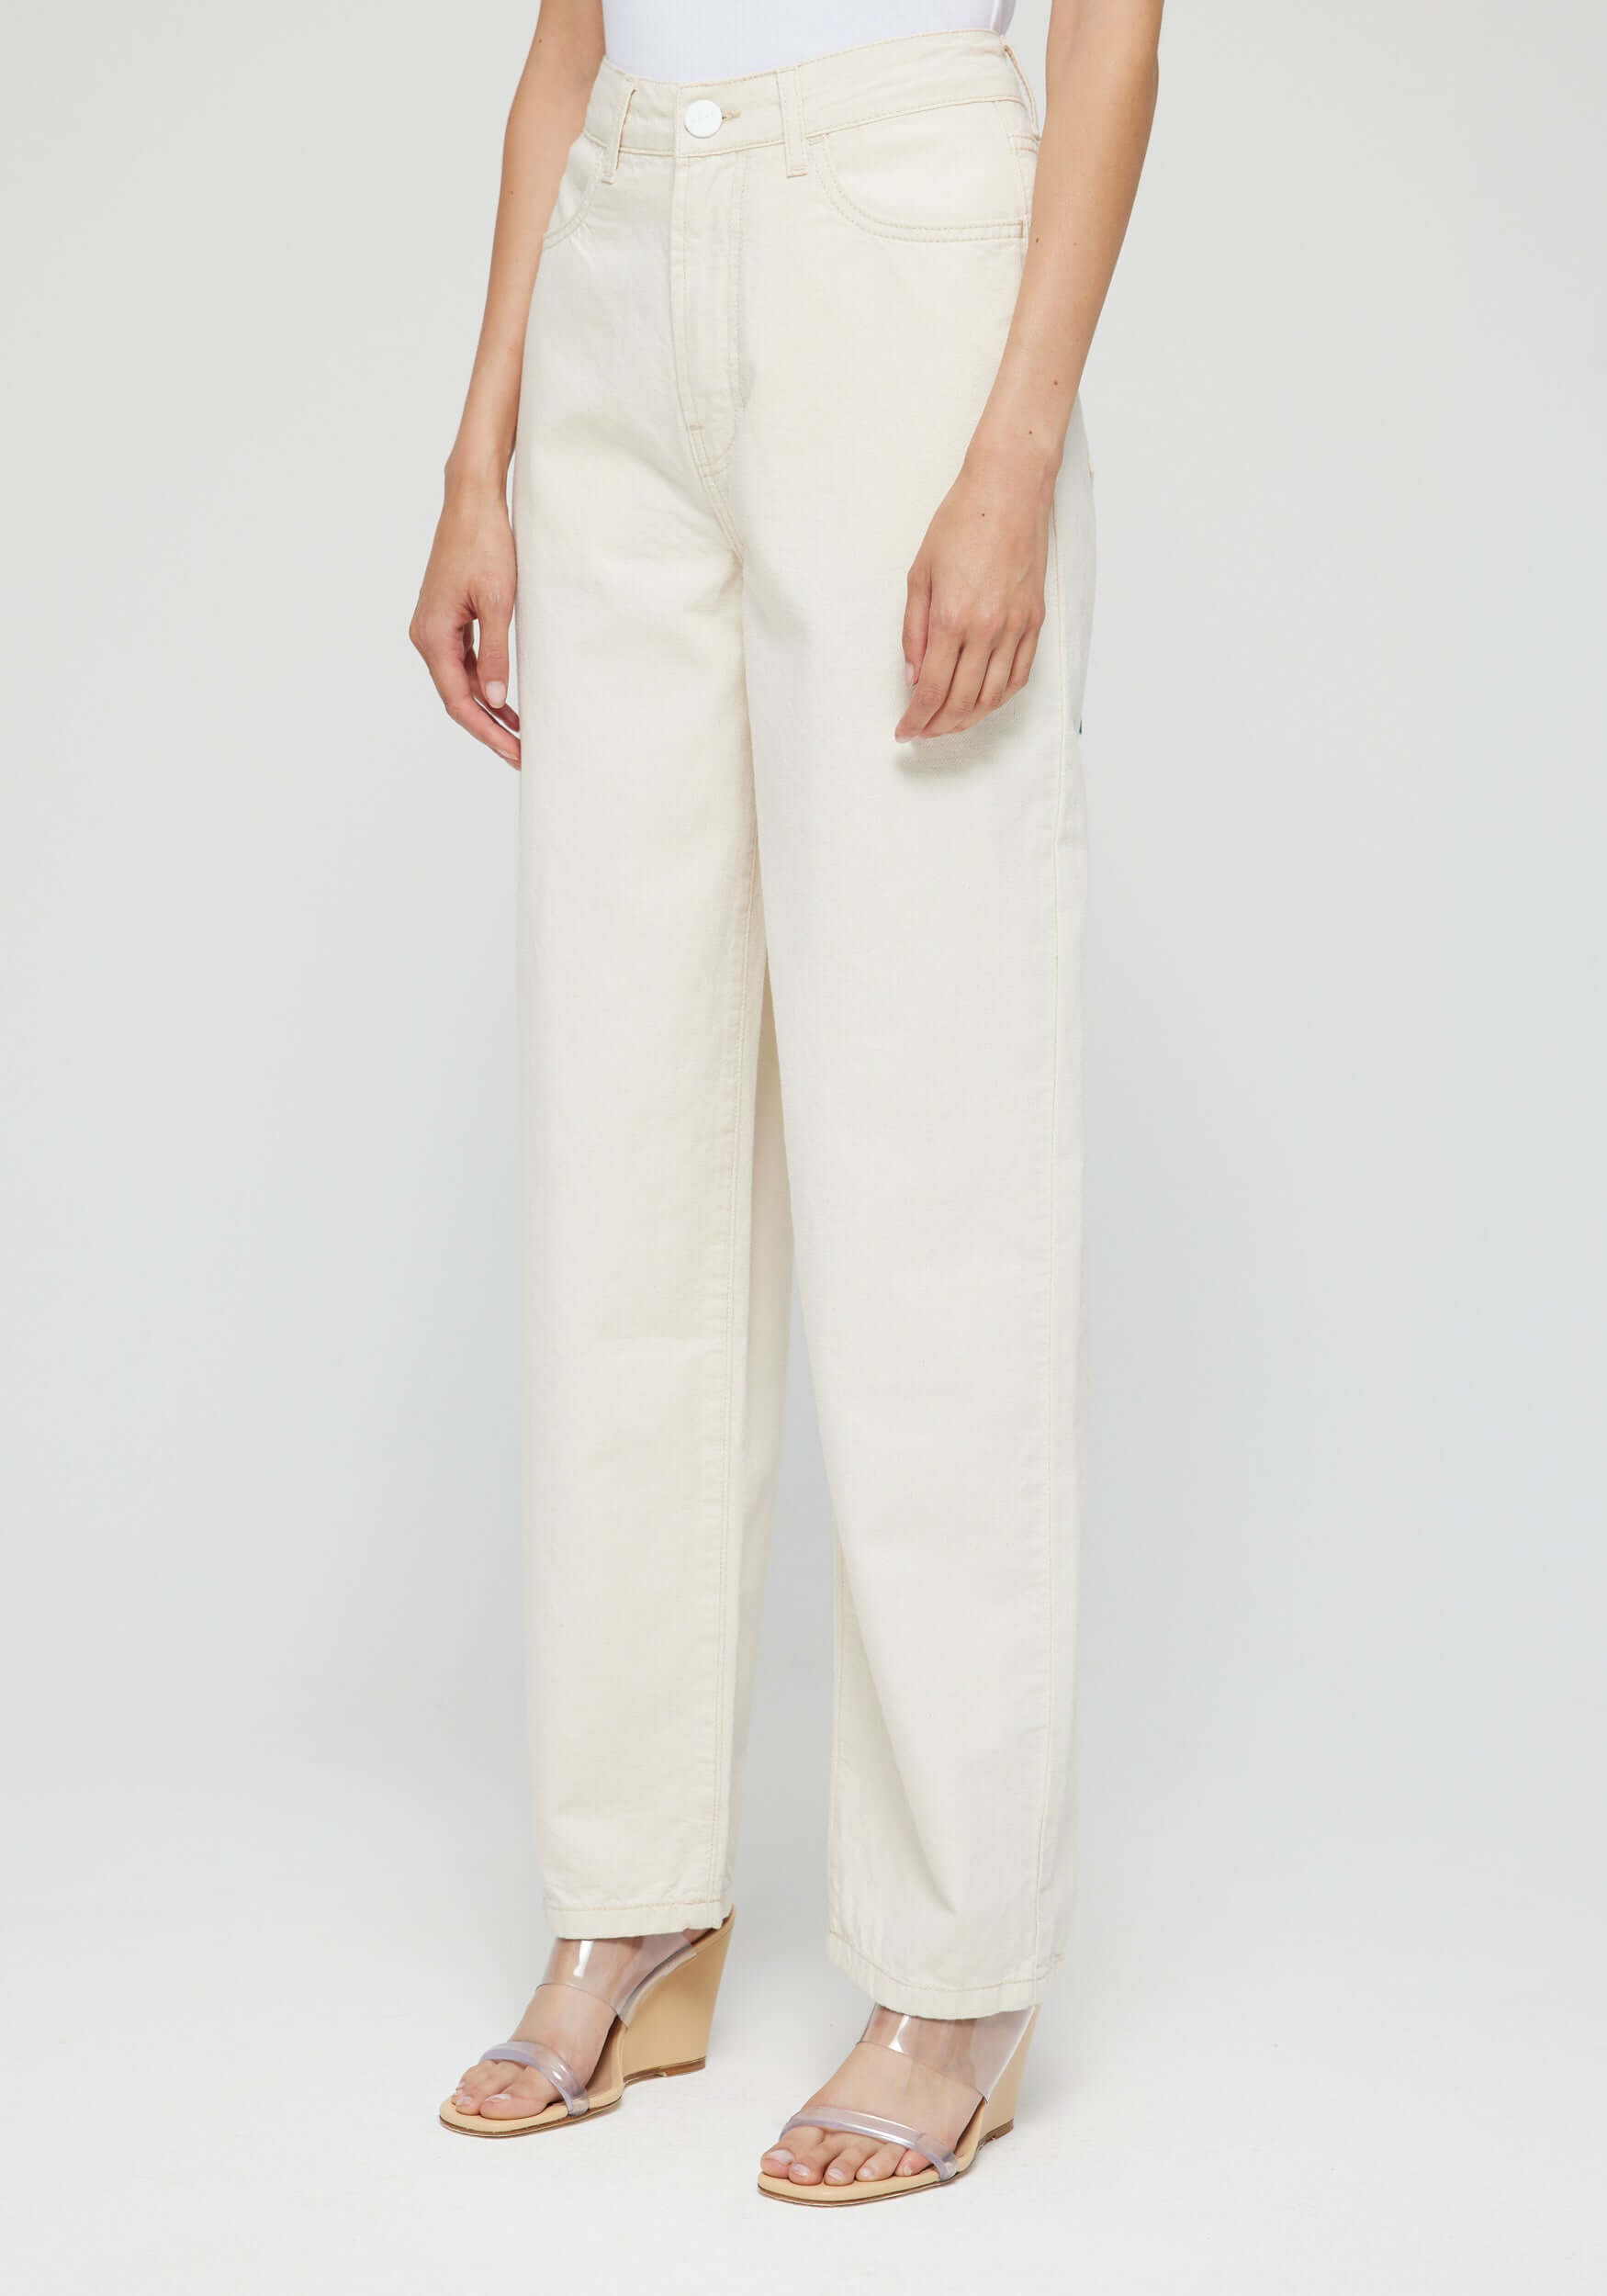 Rohe Relaxed Fit Denim in Raw Cotton available at TNT The New Trend Australia. Free shipping on orders over $300 AUD.